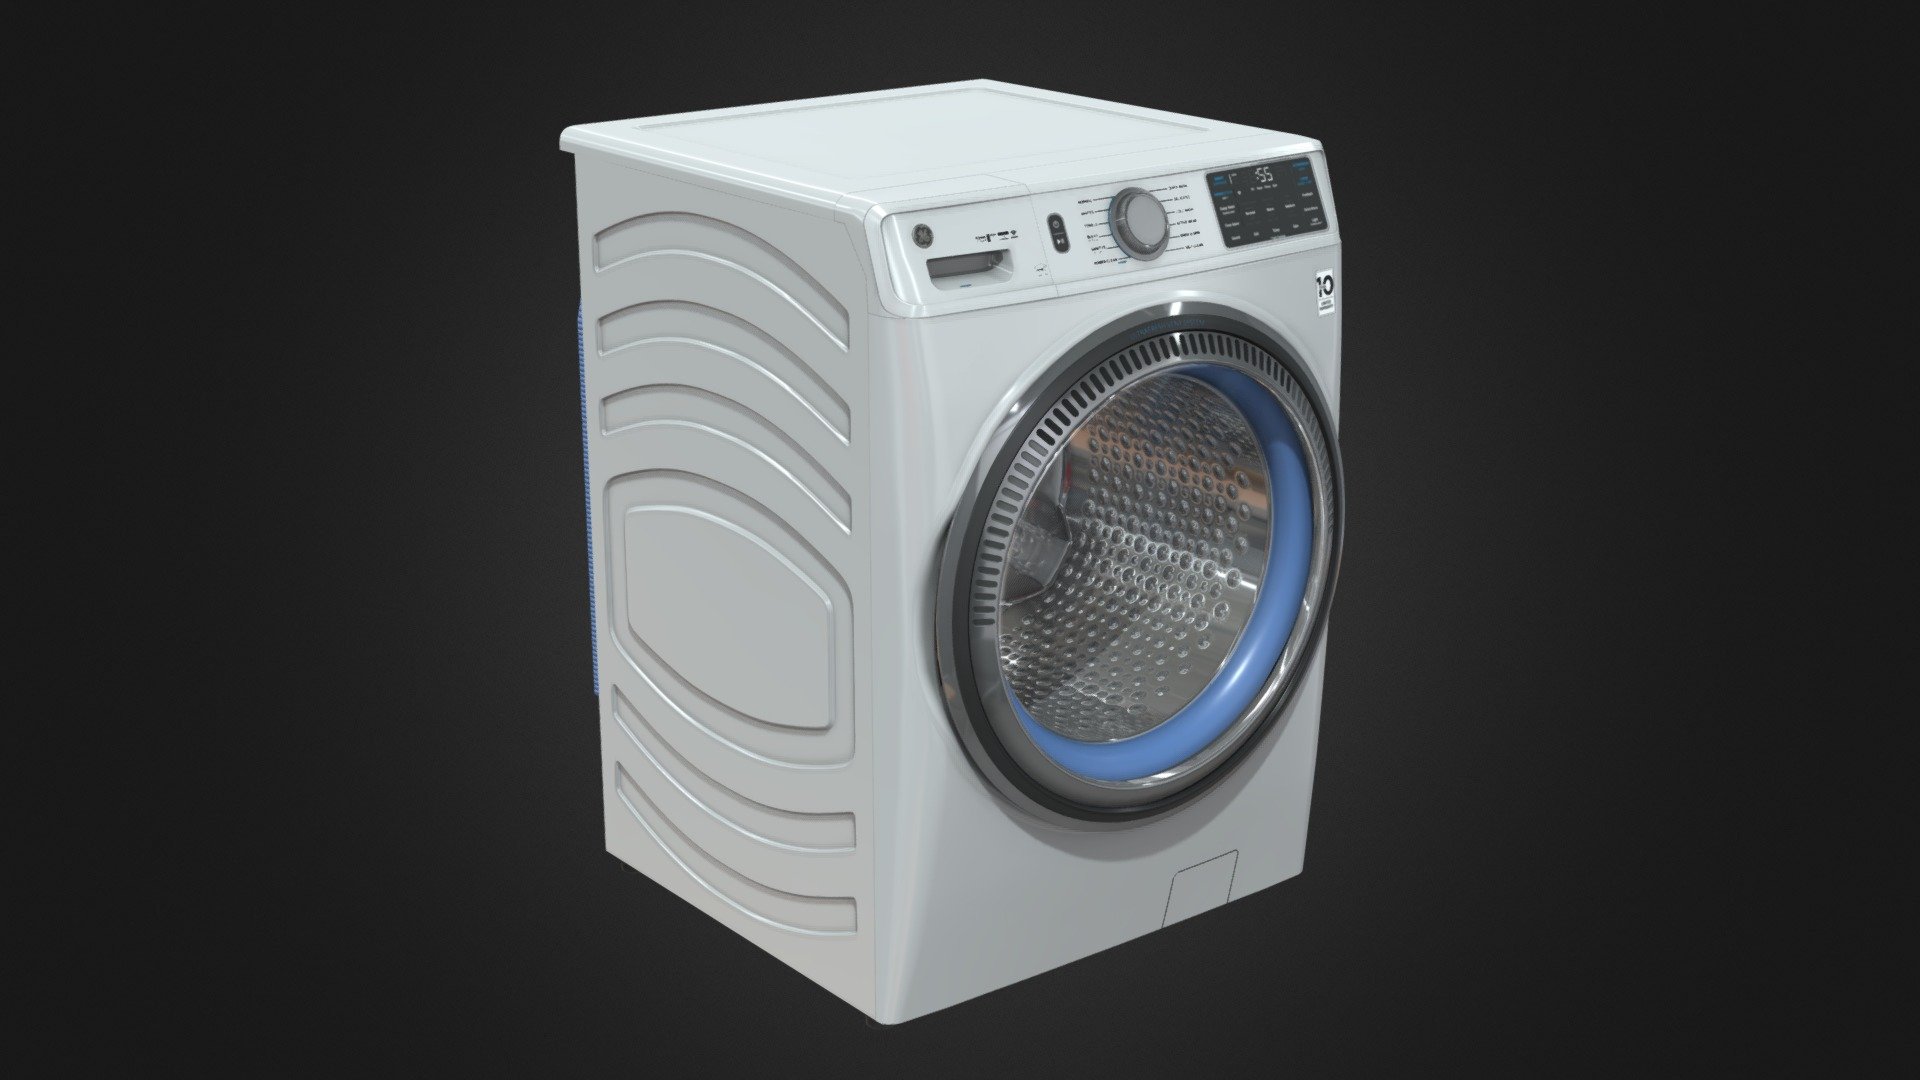 GE Electric Smart Washer PBR is an optimized model with excellent texturing for best outcome.

The model has an optimized low poly mesh with the greatest possible number of simplifications that do not affect photo-realism but can help to simplify it, thus lightening your scene and allowing for using this model in real-time 3d applications.

In this product, all objects are ERROR-FREE. All LEGAL Geometry. Subdivisions are not required for this product. Real-world accurate model.


Format Type



3ds Max 2017 (Default Physical PBR Shader)

FBX

OBJ

3DS


Texture Type
3 multi/sub material used. So 3 set of textures of:




Albedo

Metalness

Roughness

Normal

Ambient Occlusion

Alpha

You might need to re-assign textures map to model in your relevant software

You might need to flip green channel of Normal map according to your relevant softwar - GE Electric Smart Washer PBR - Buy Royalty Free 3D model by luxe3dworld 3d model